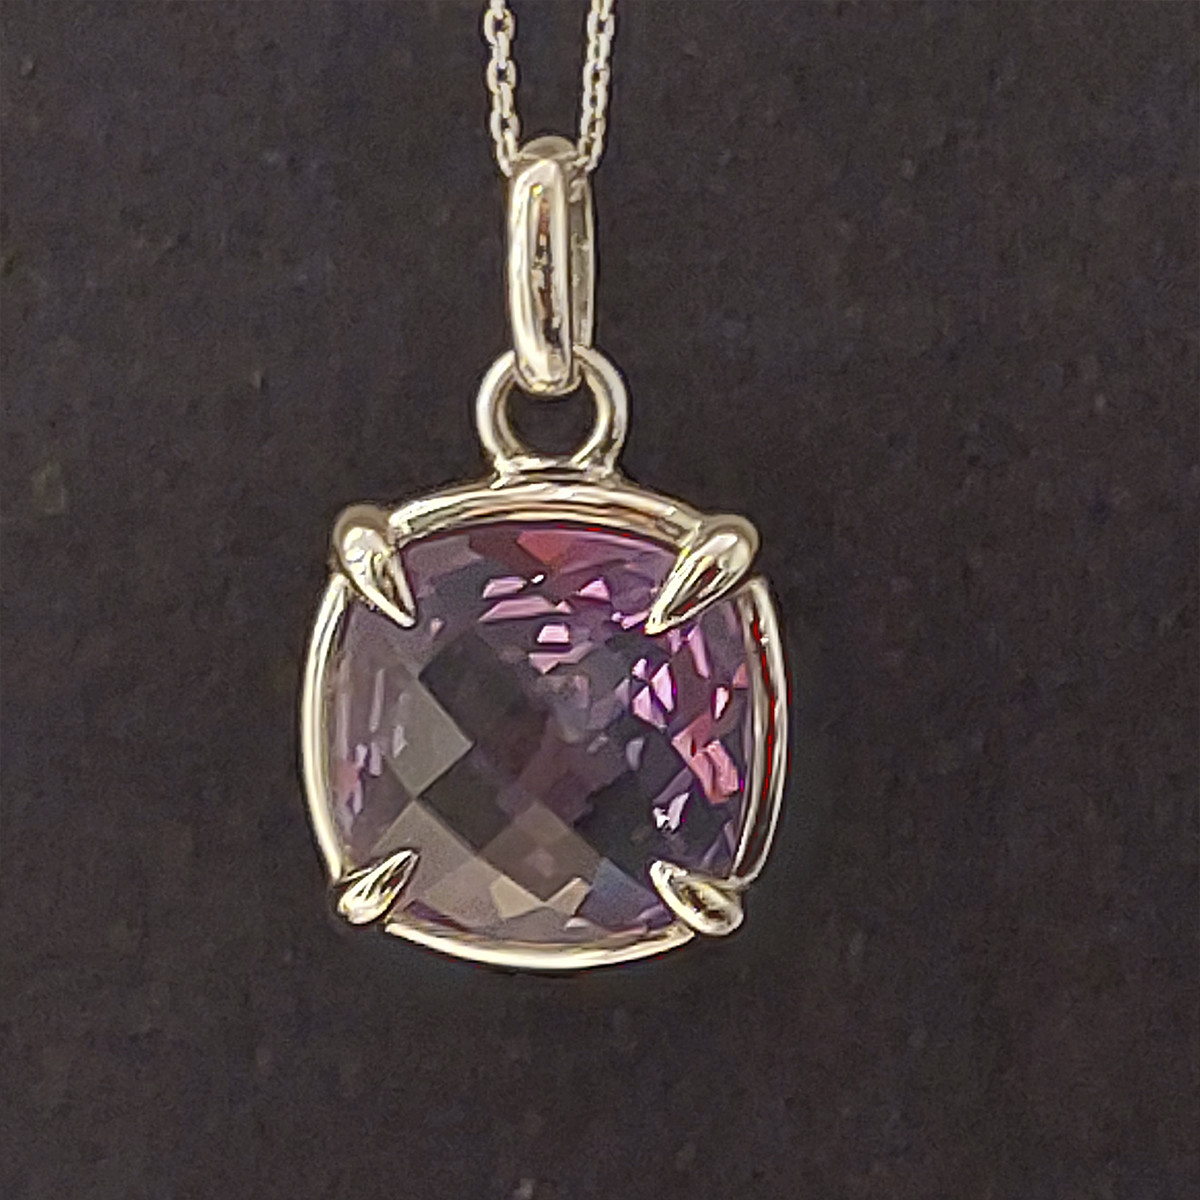 WHITE GOLD AMETHYST NECKLACE